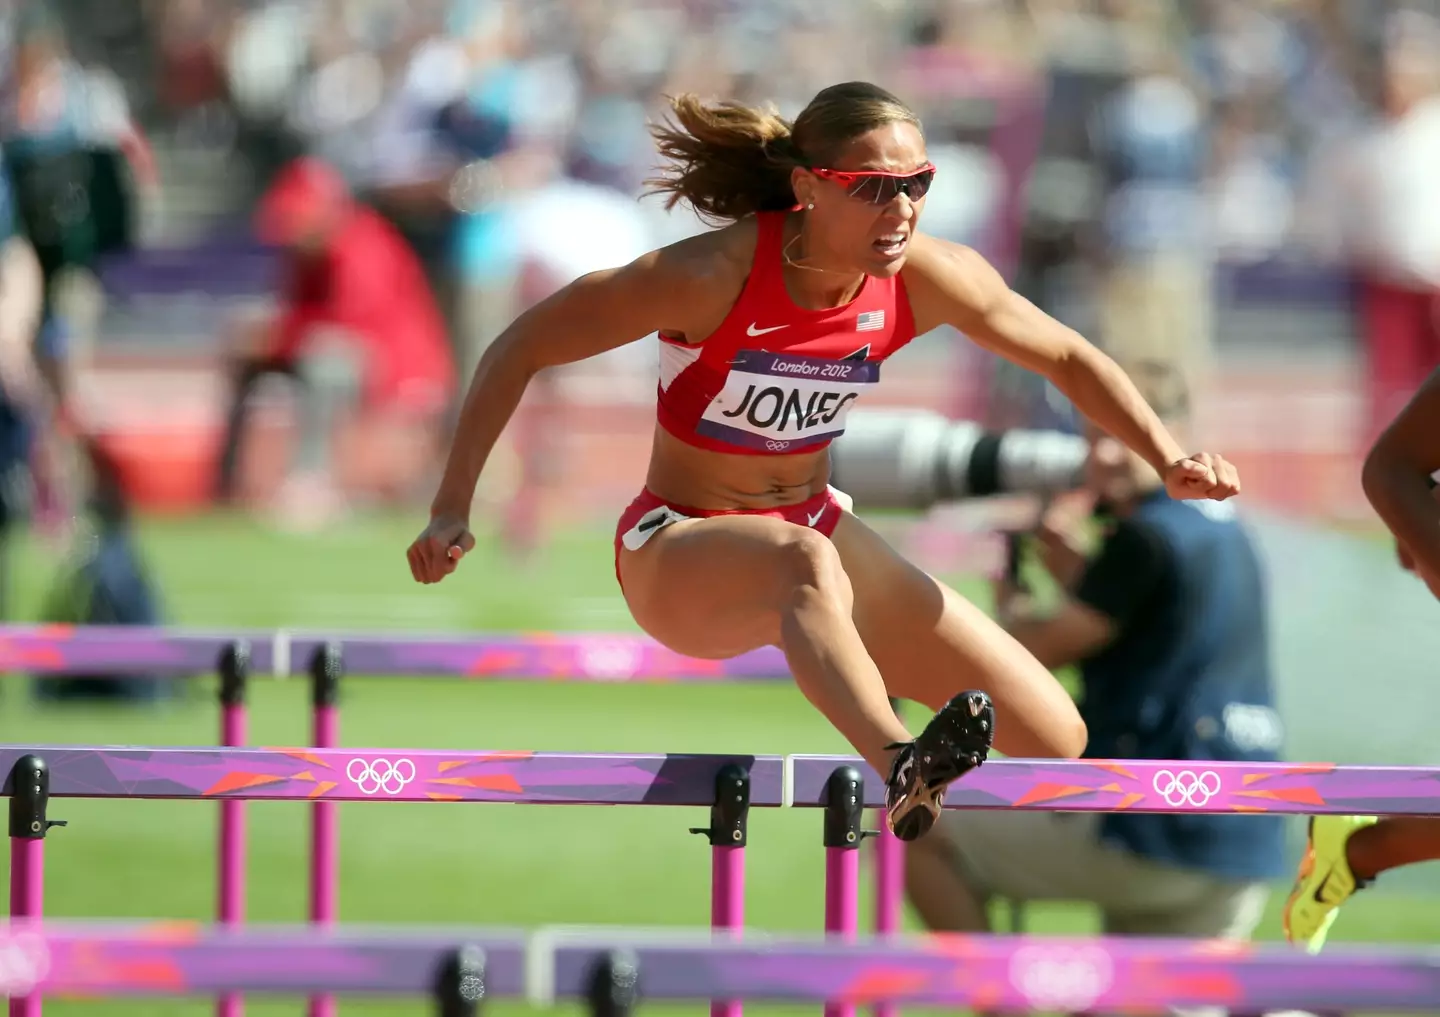 Lolo Jones is an icon in the world of athletics.